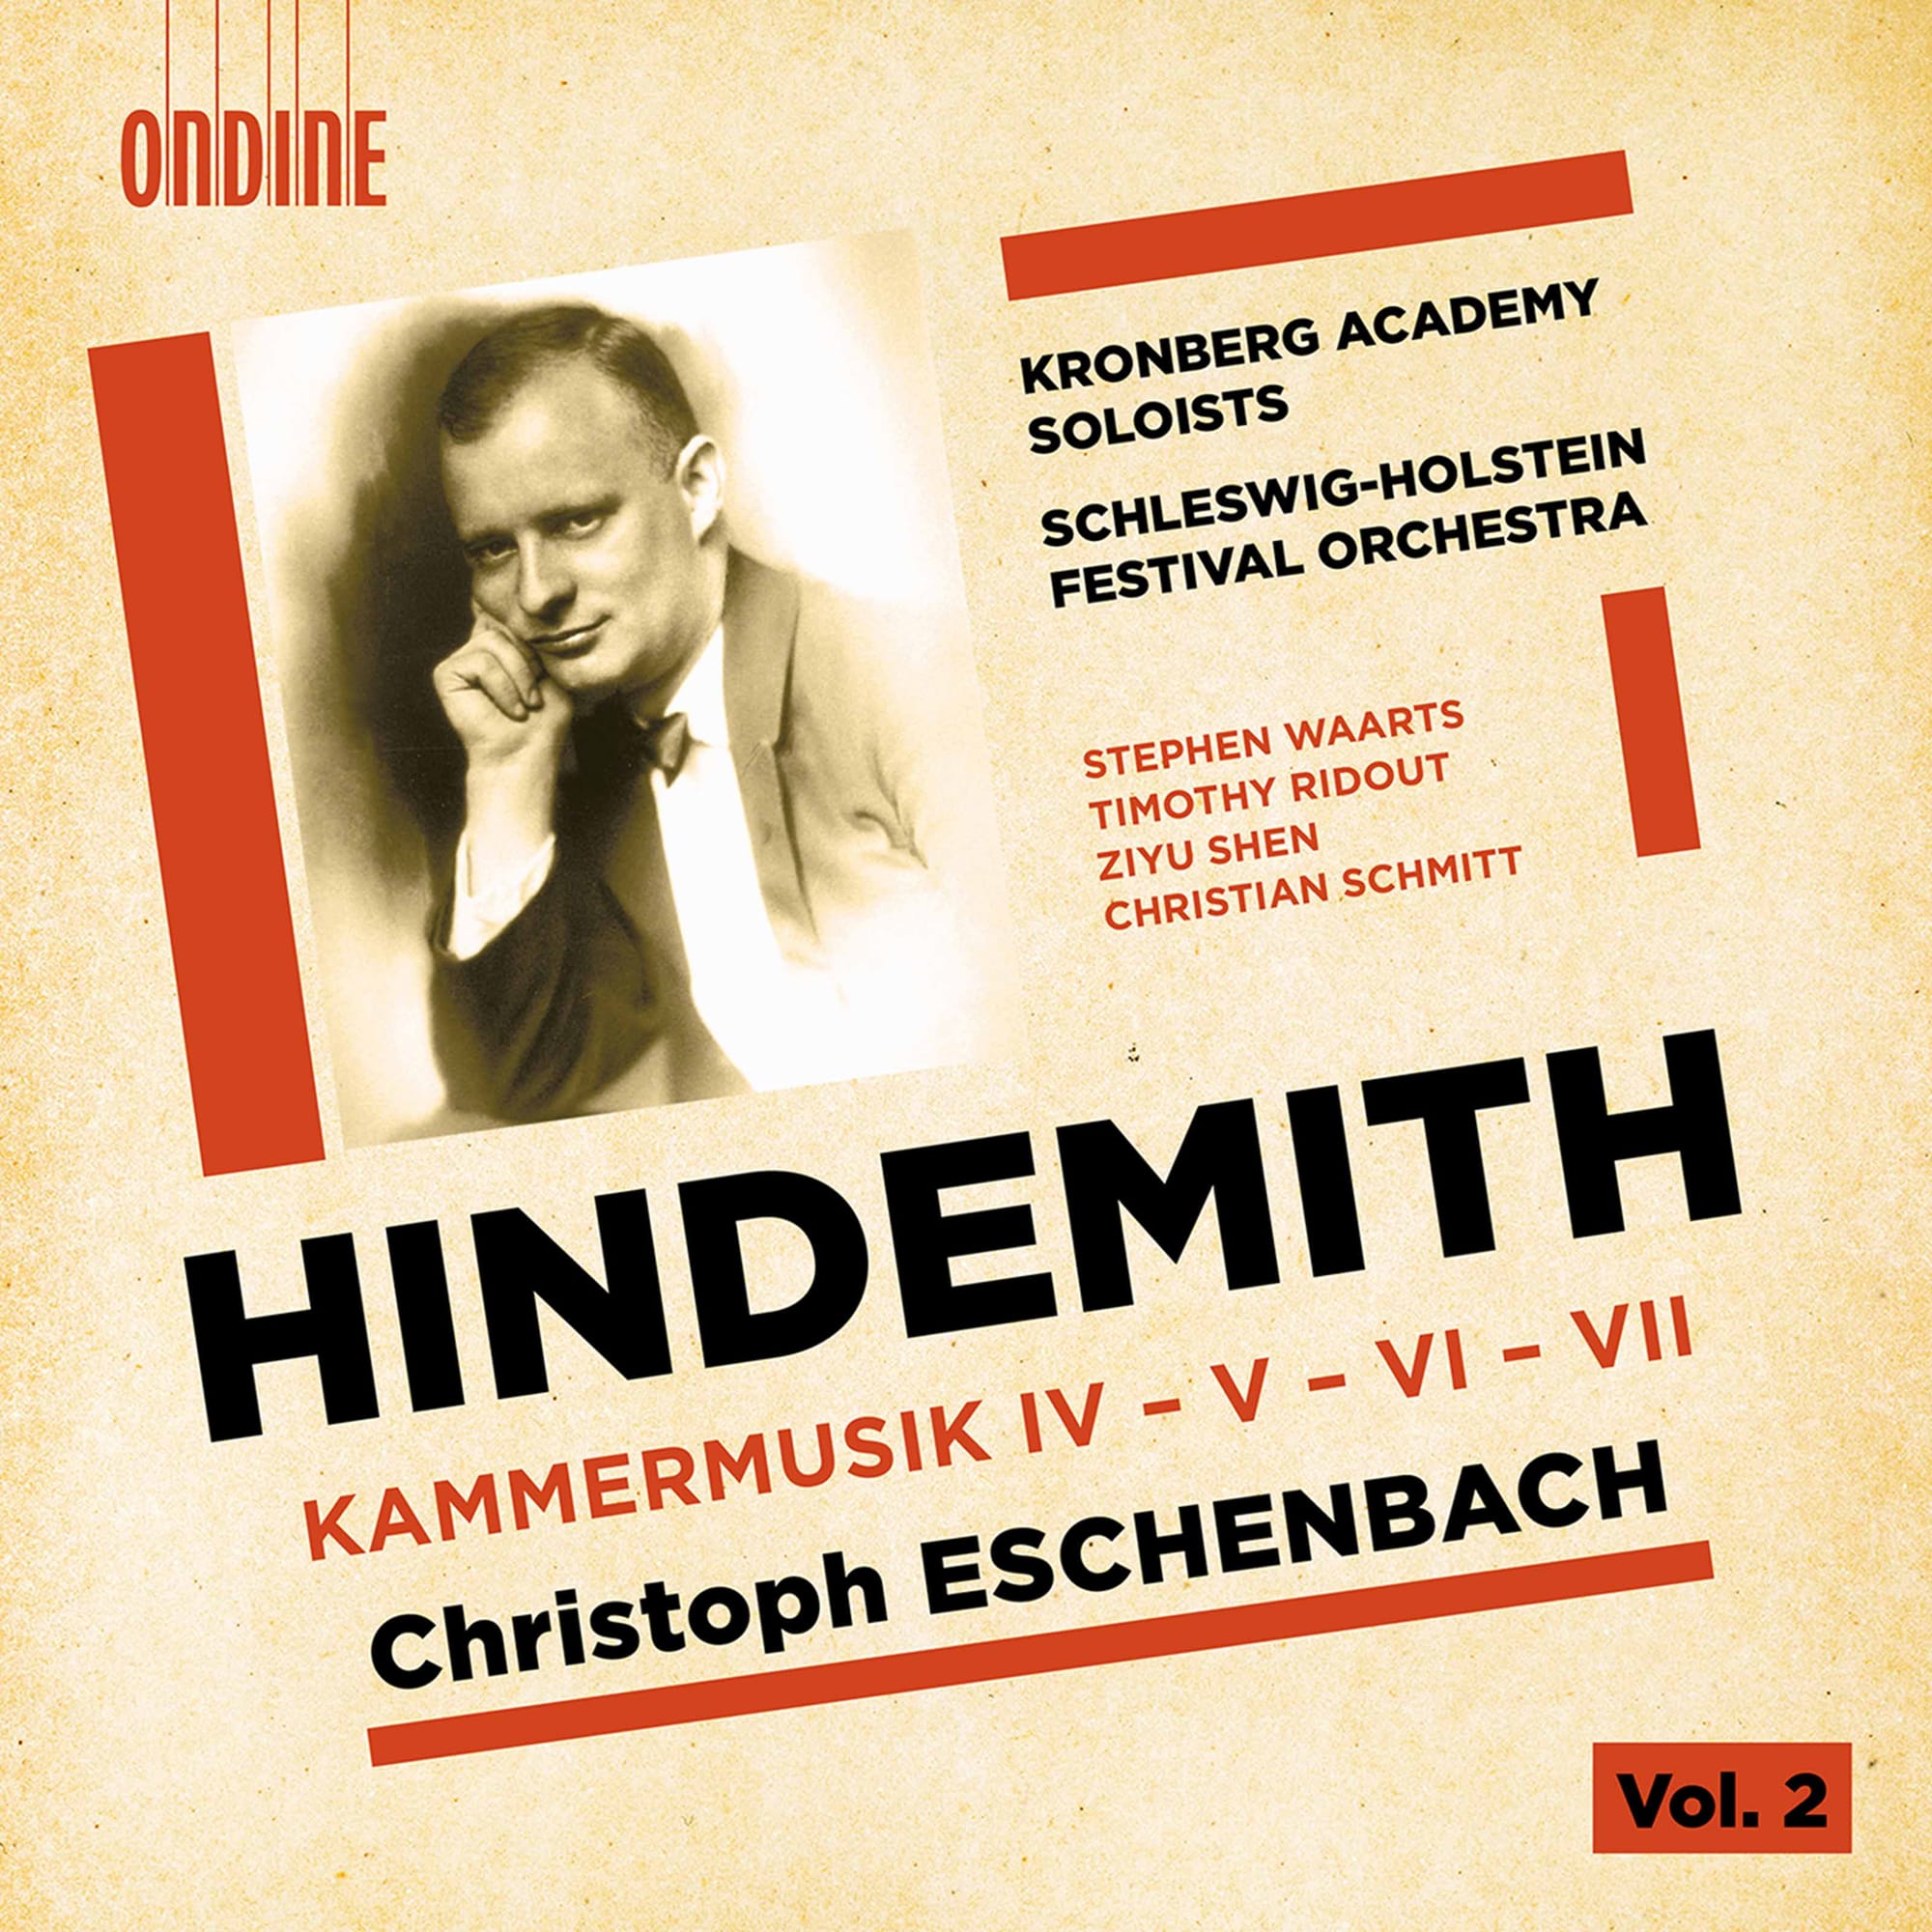 Hindemith from Christoph Eschenbach